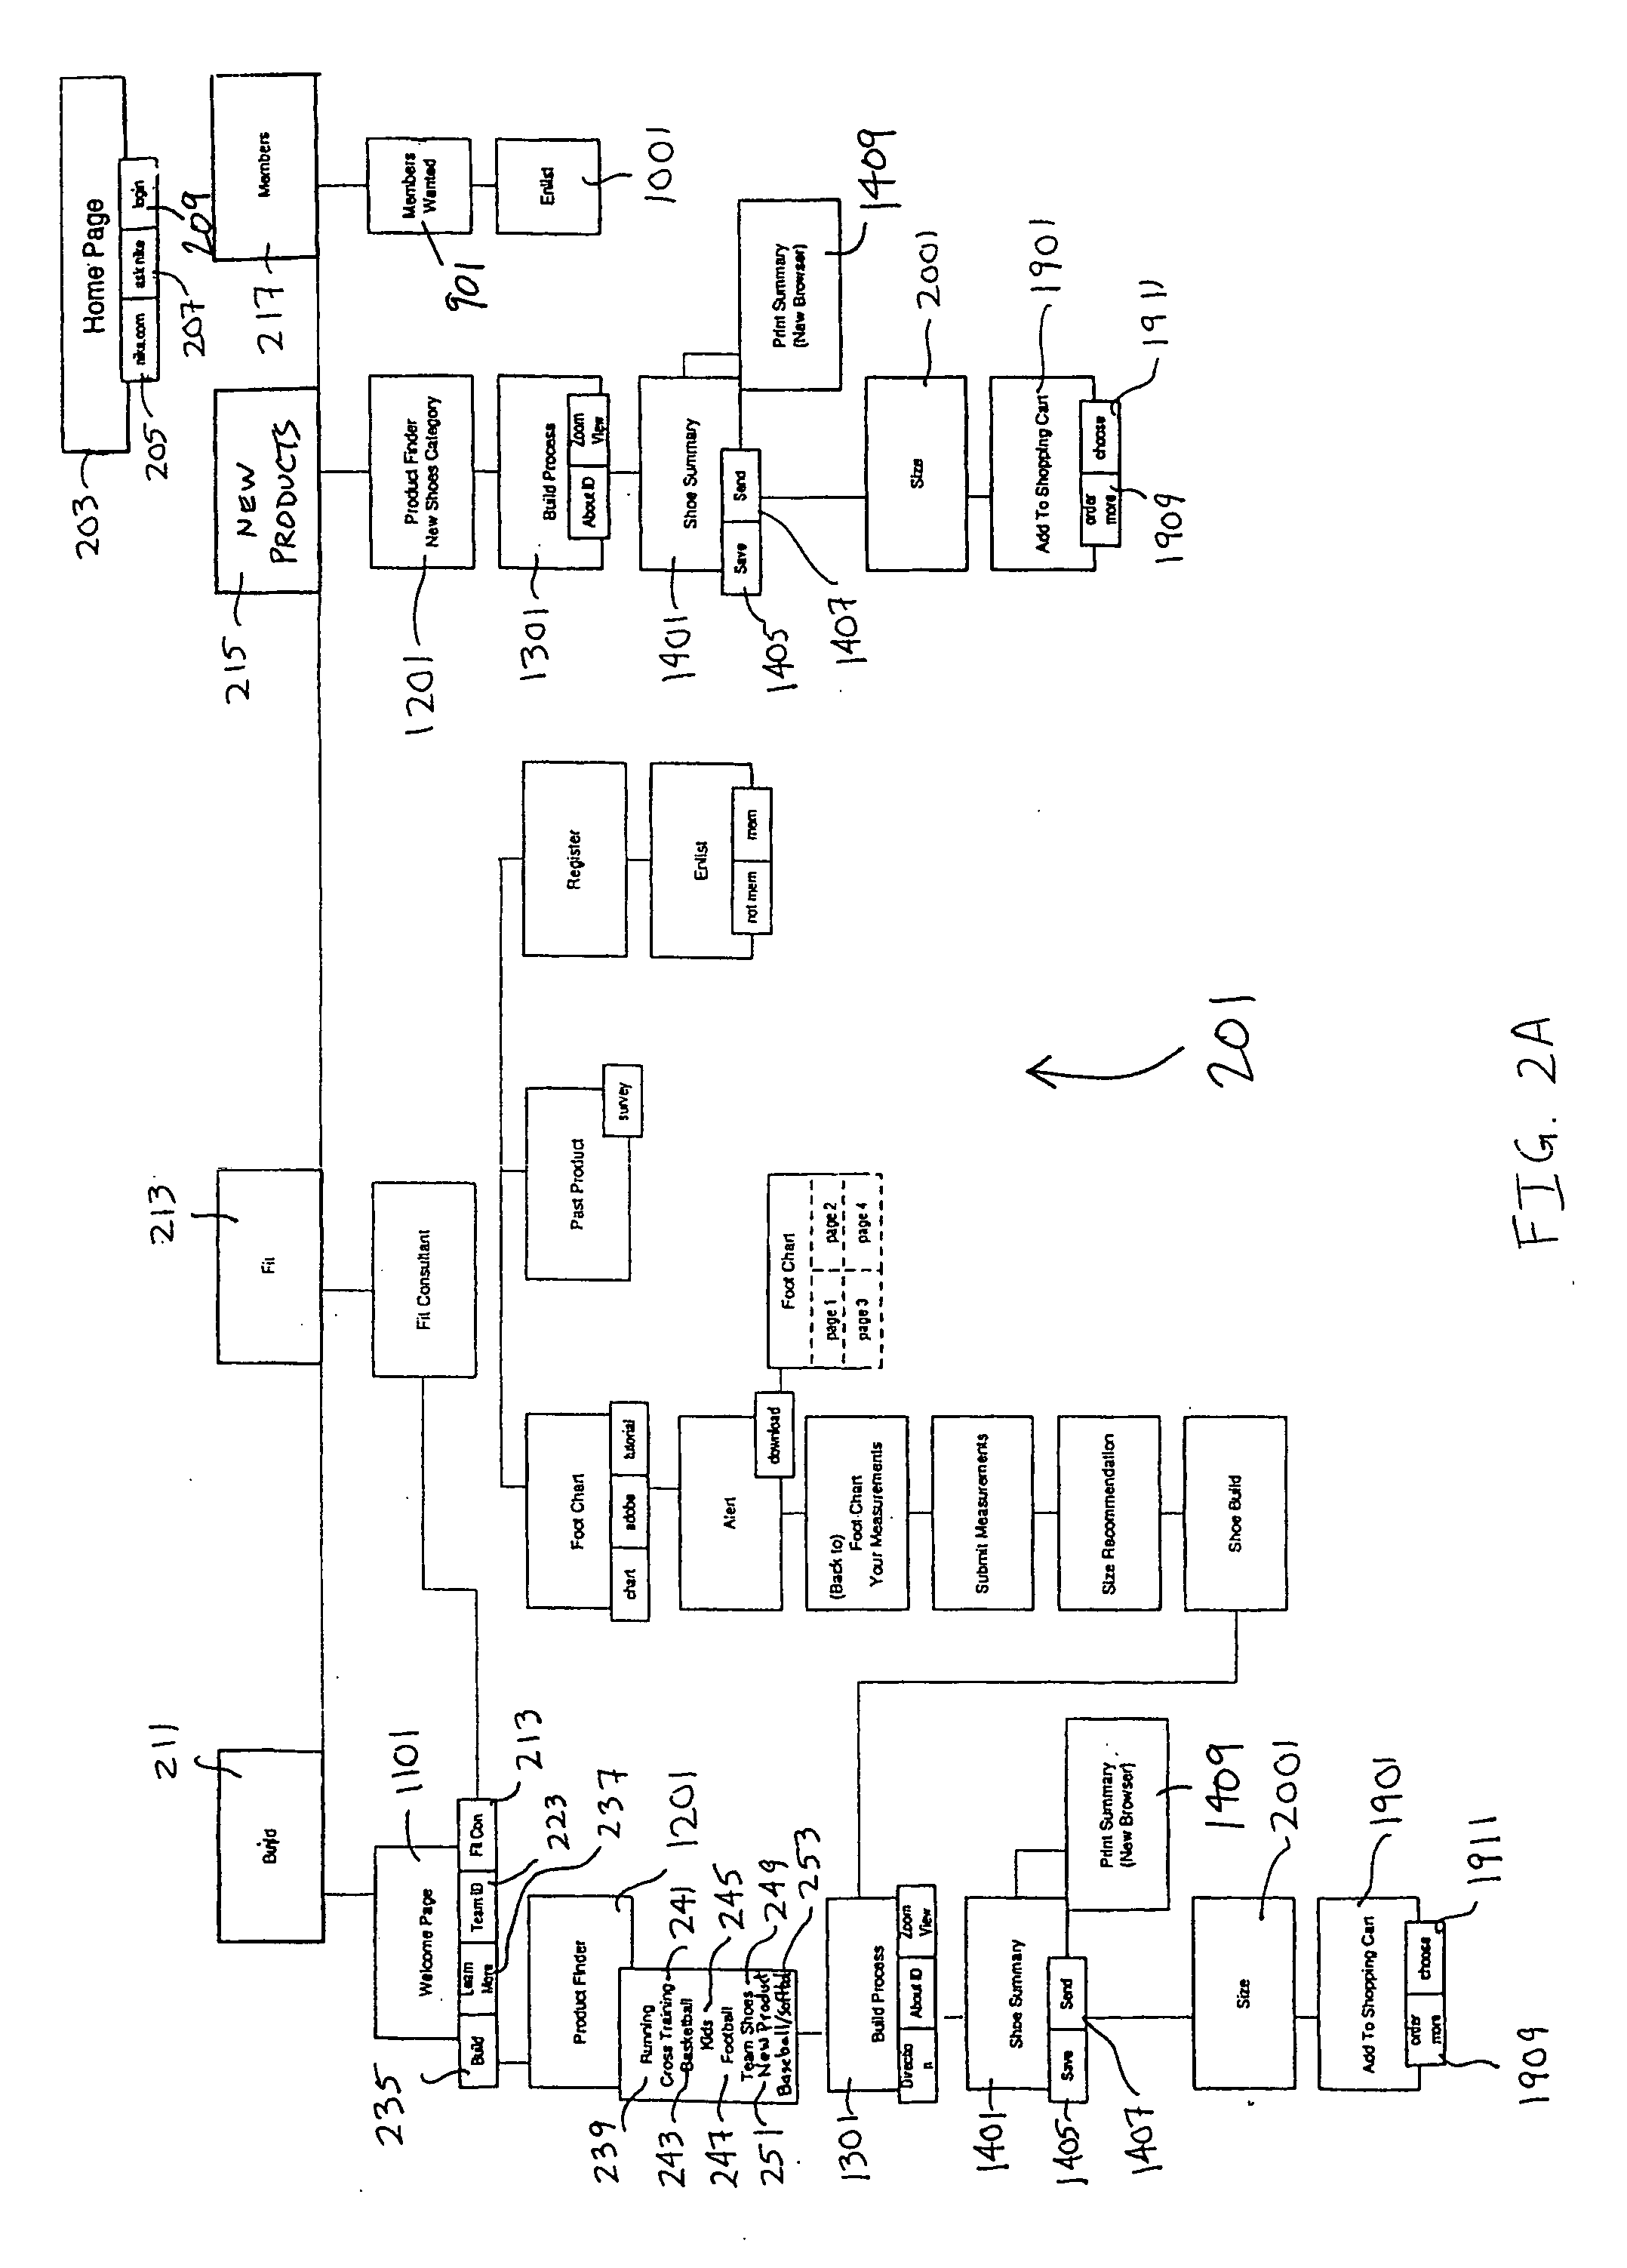 Method and system for custom-manufacturing footwear